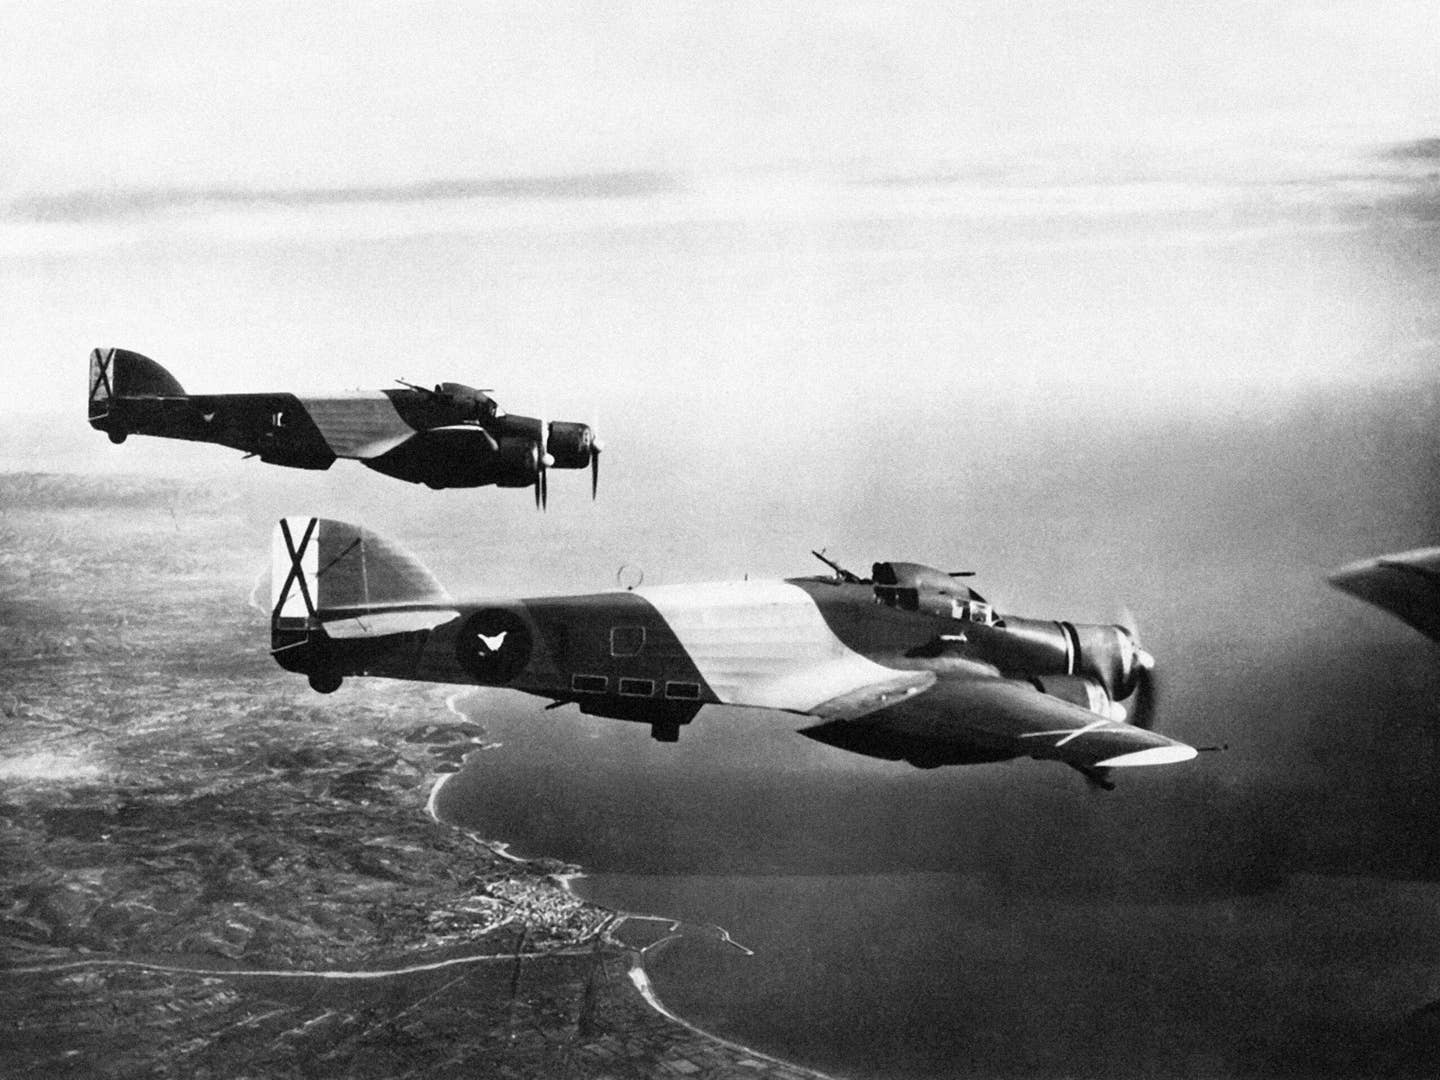 Italian Savoia-Marchetti SM.79 medium bombers flying over Tarragona in southern Spain in the service of Franco’s Nationalist forces, 1937. <em>Pictures From History/Universal Images Group via Getty Images</em><br>